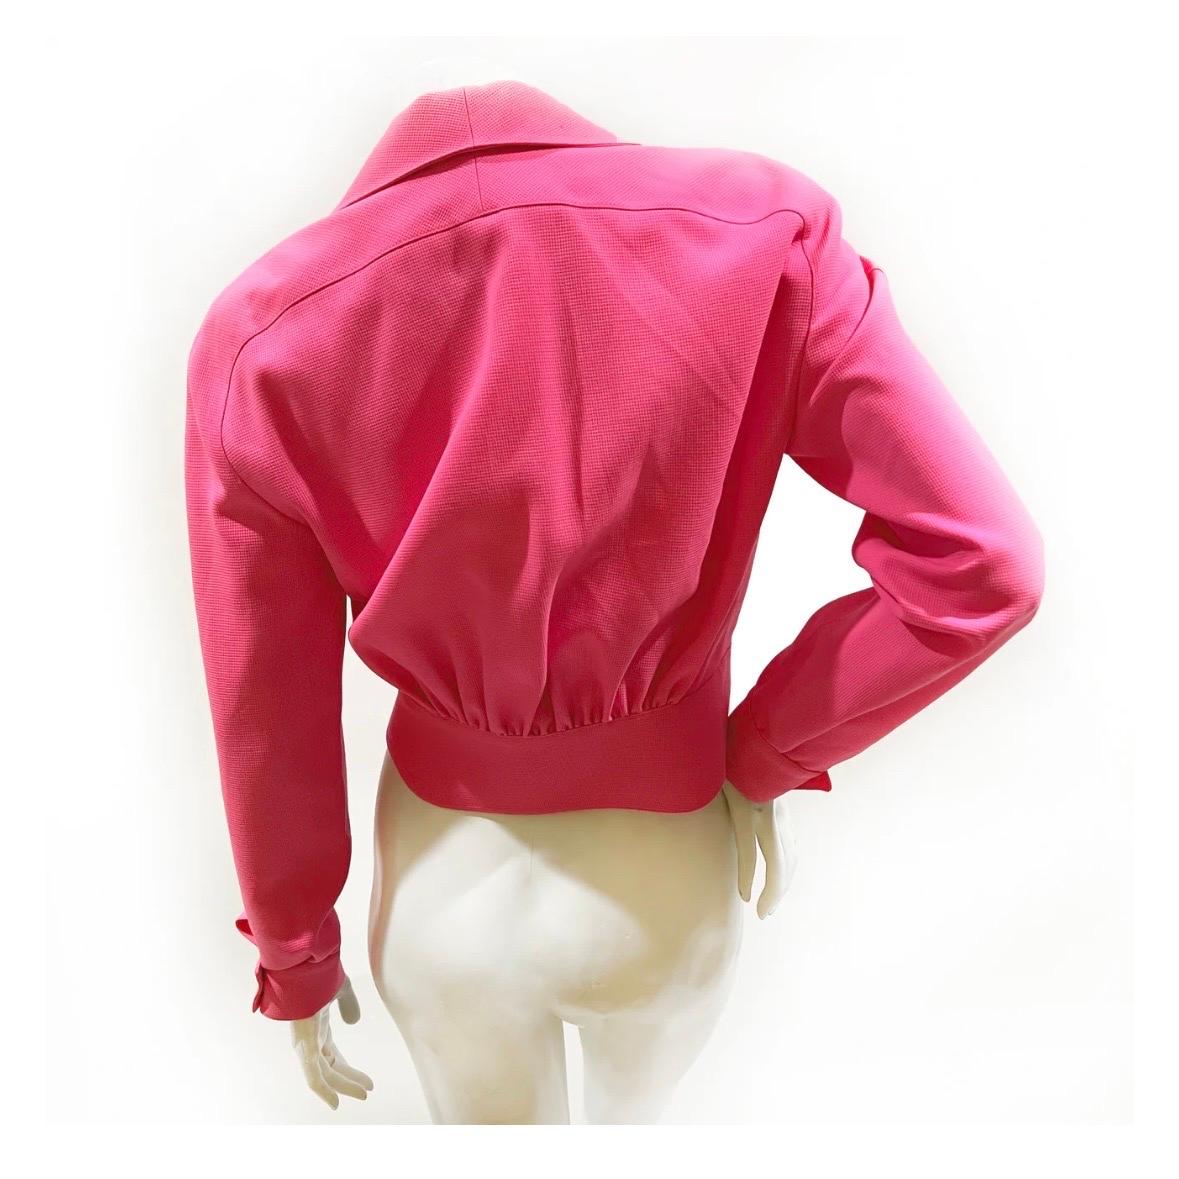 Vintage hot pink zip designer jacket by Thierry Mugler  
1990's
Made in France
Hot pink textured fabric  
Collared with square V neckline
Silver metal star logo zipper pull
Double snap cuff closures (silver metal stud shaped)  
100% wool (lining 60%